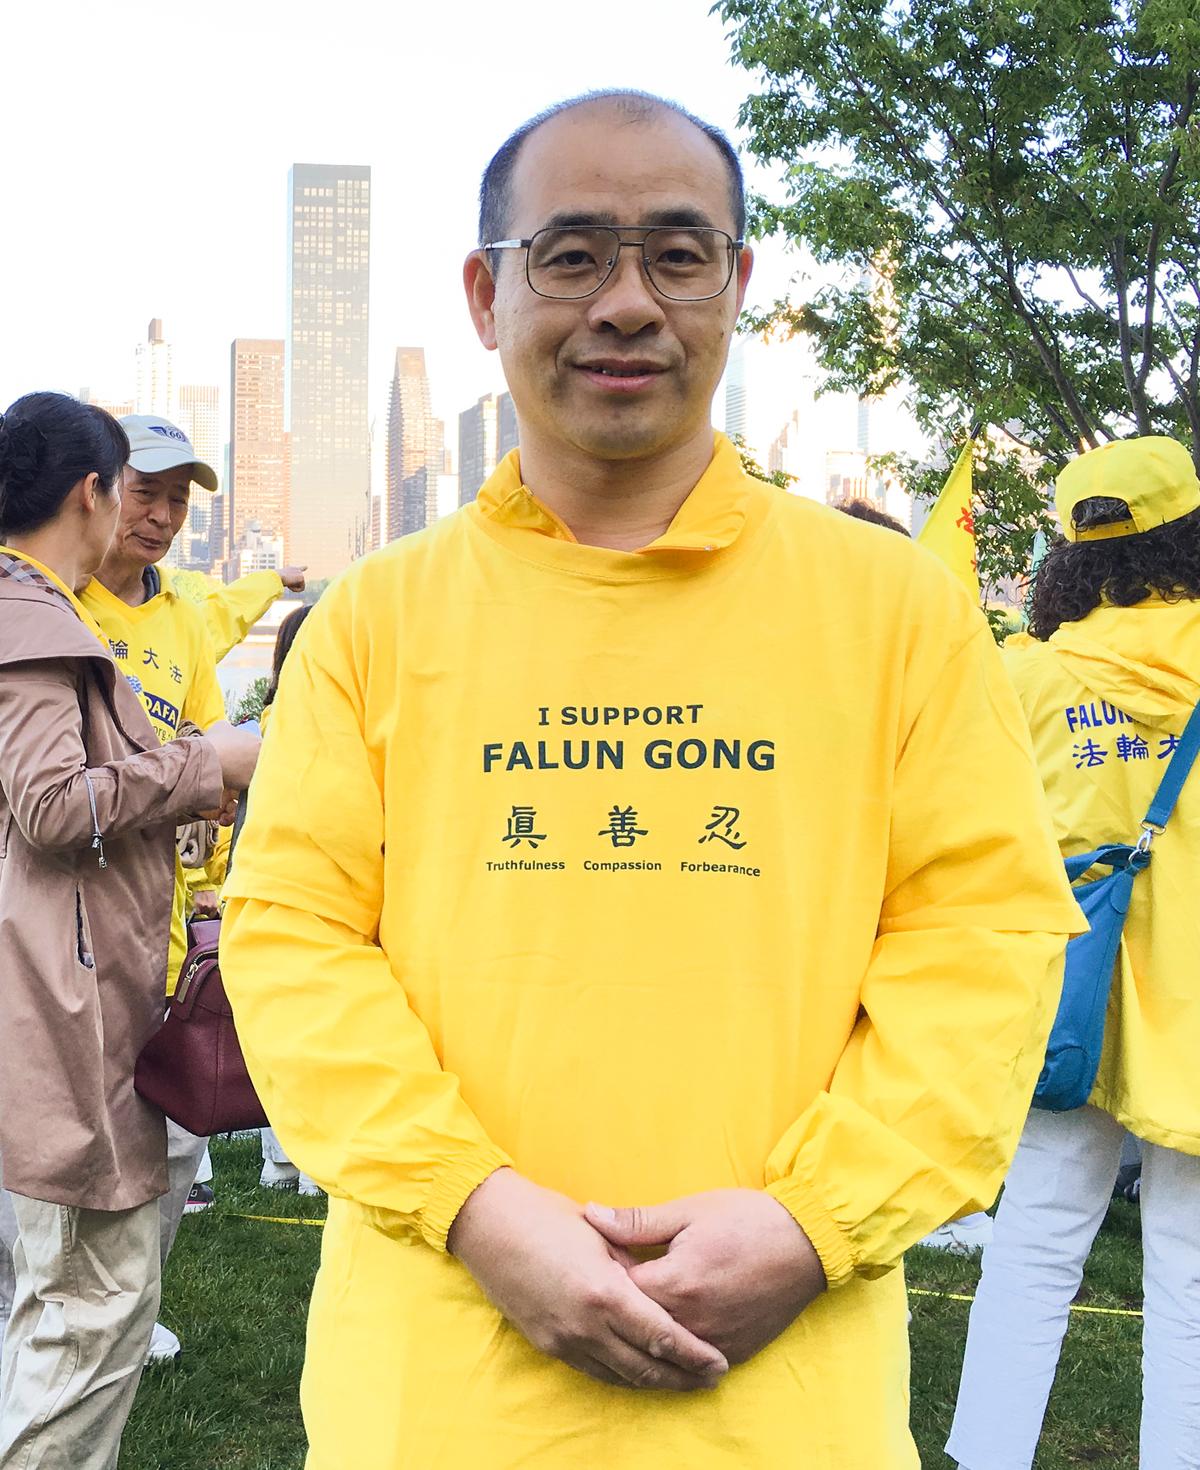 Kurebayashi Mitsuhiro, a Chinese Japanese practitioner of Falun Gong, joins a character formation event at Gantry Plaza State Park on May 12, 2016. (Larry Ong/Epoch Times)